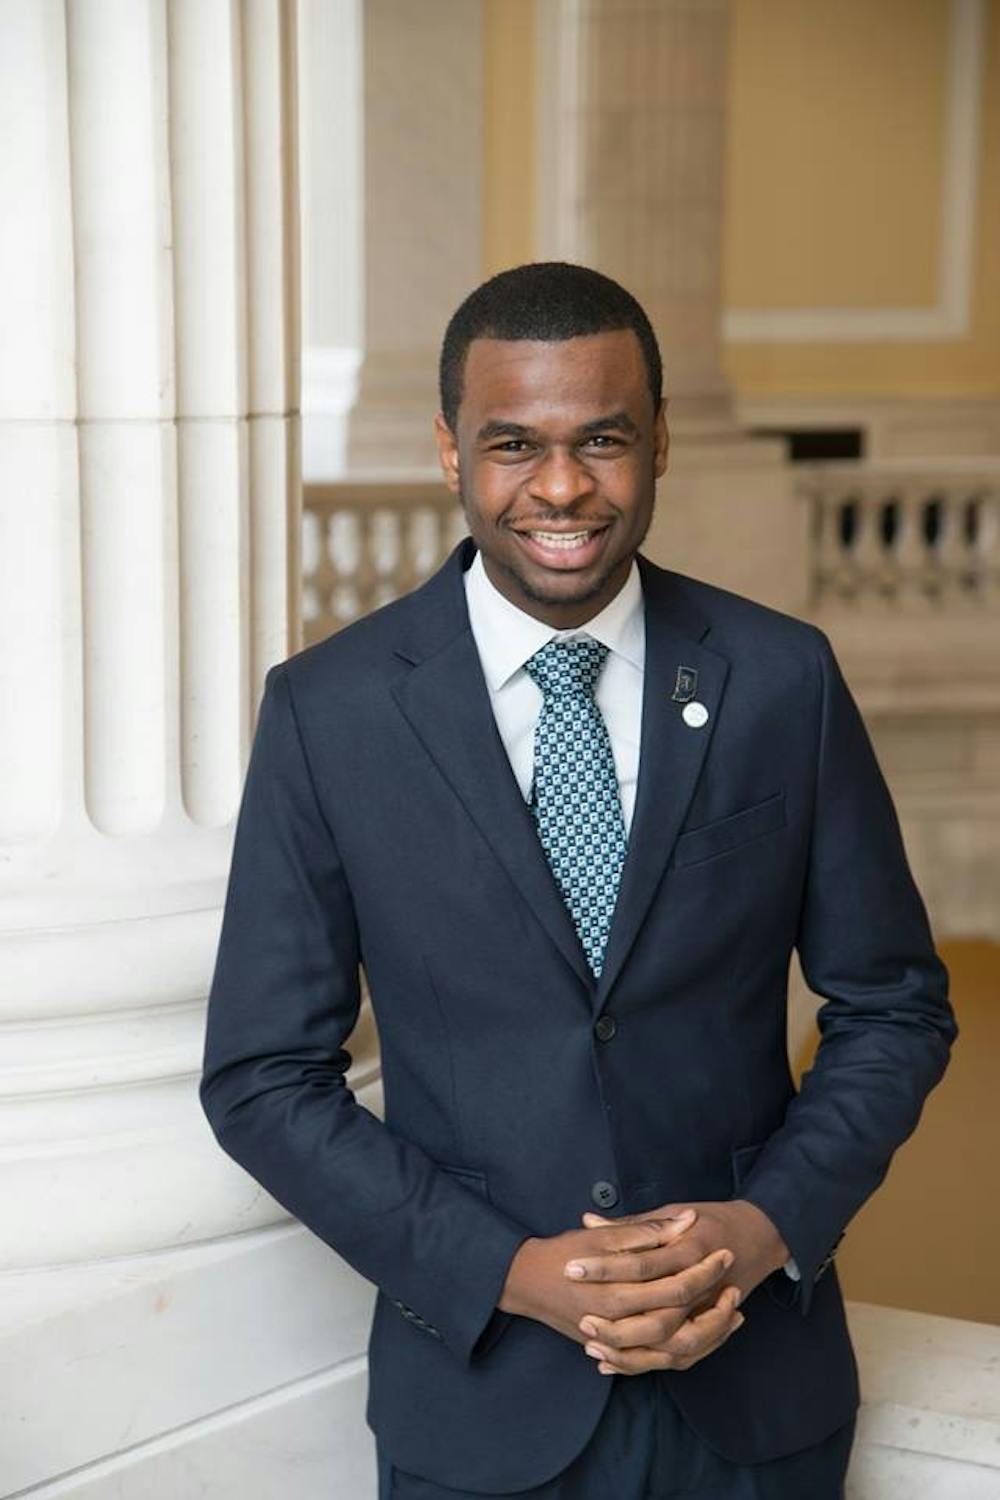 <p>Steven Williams, a senior political science and criminal justice major, is interning at the office of Congressman G.K Butterfield. PHOTO COURTESY OF FACEBOOK</p>